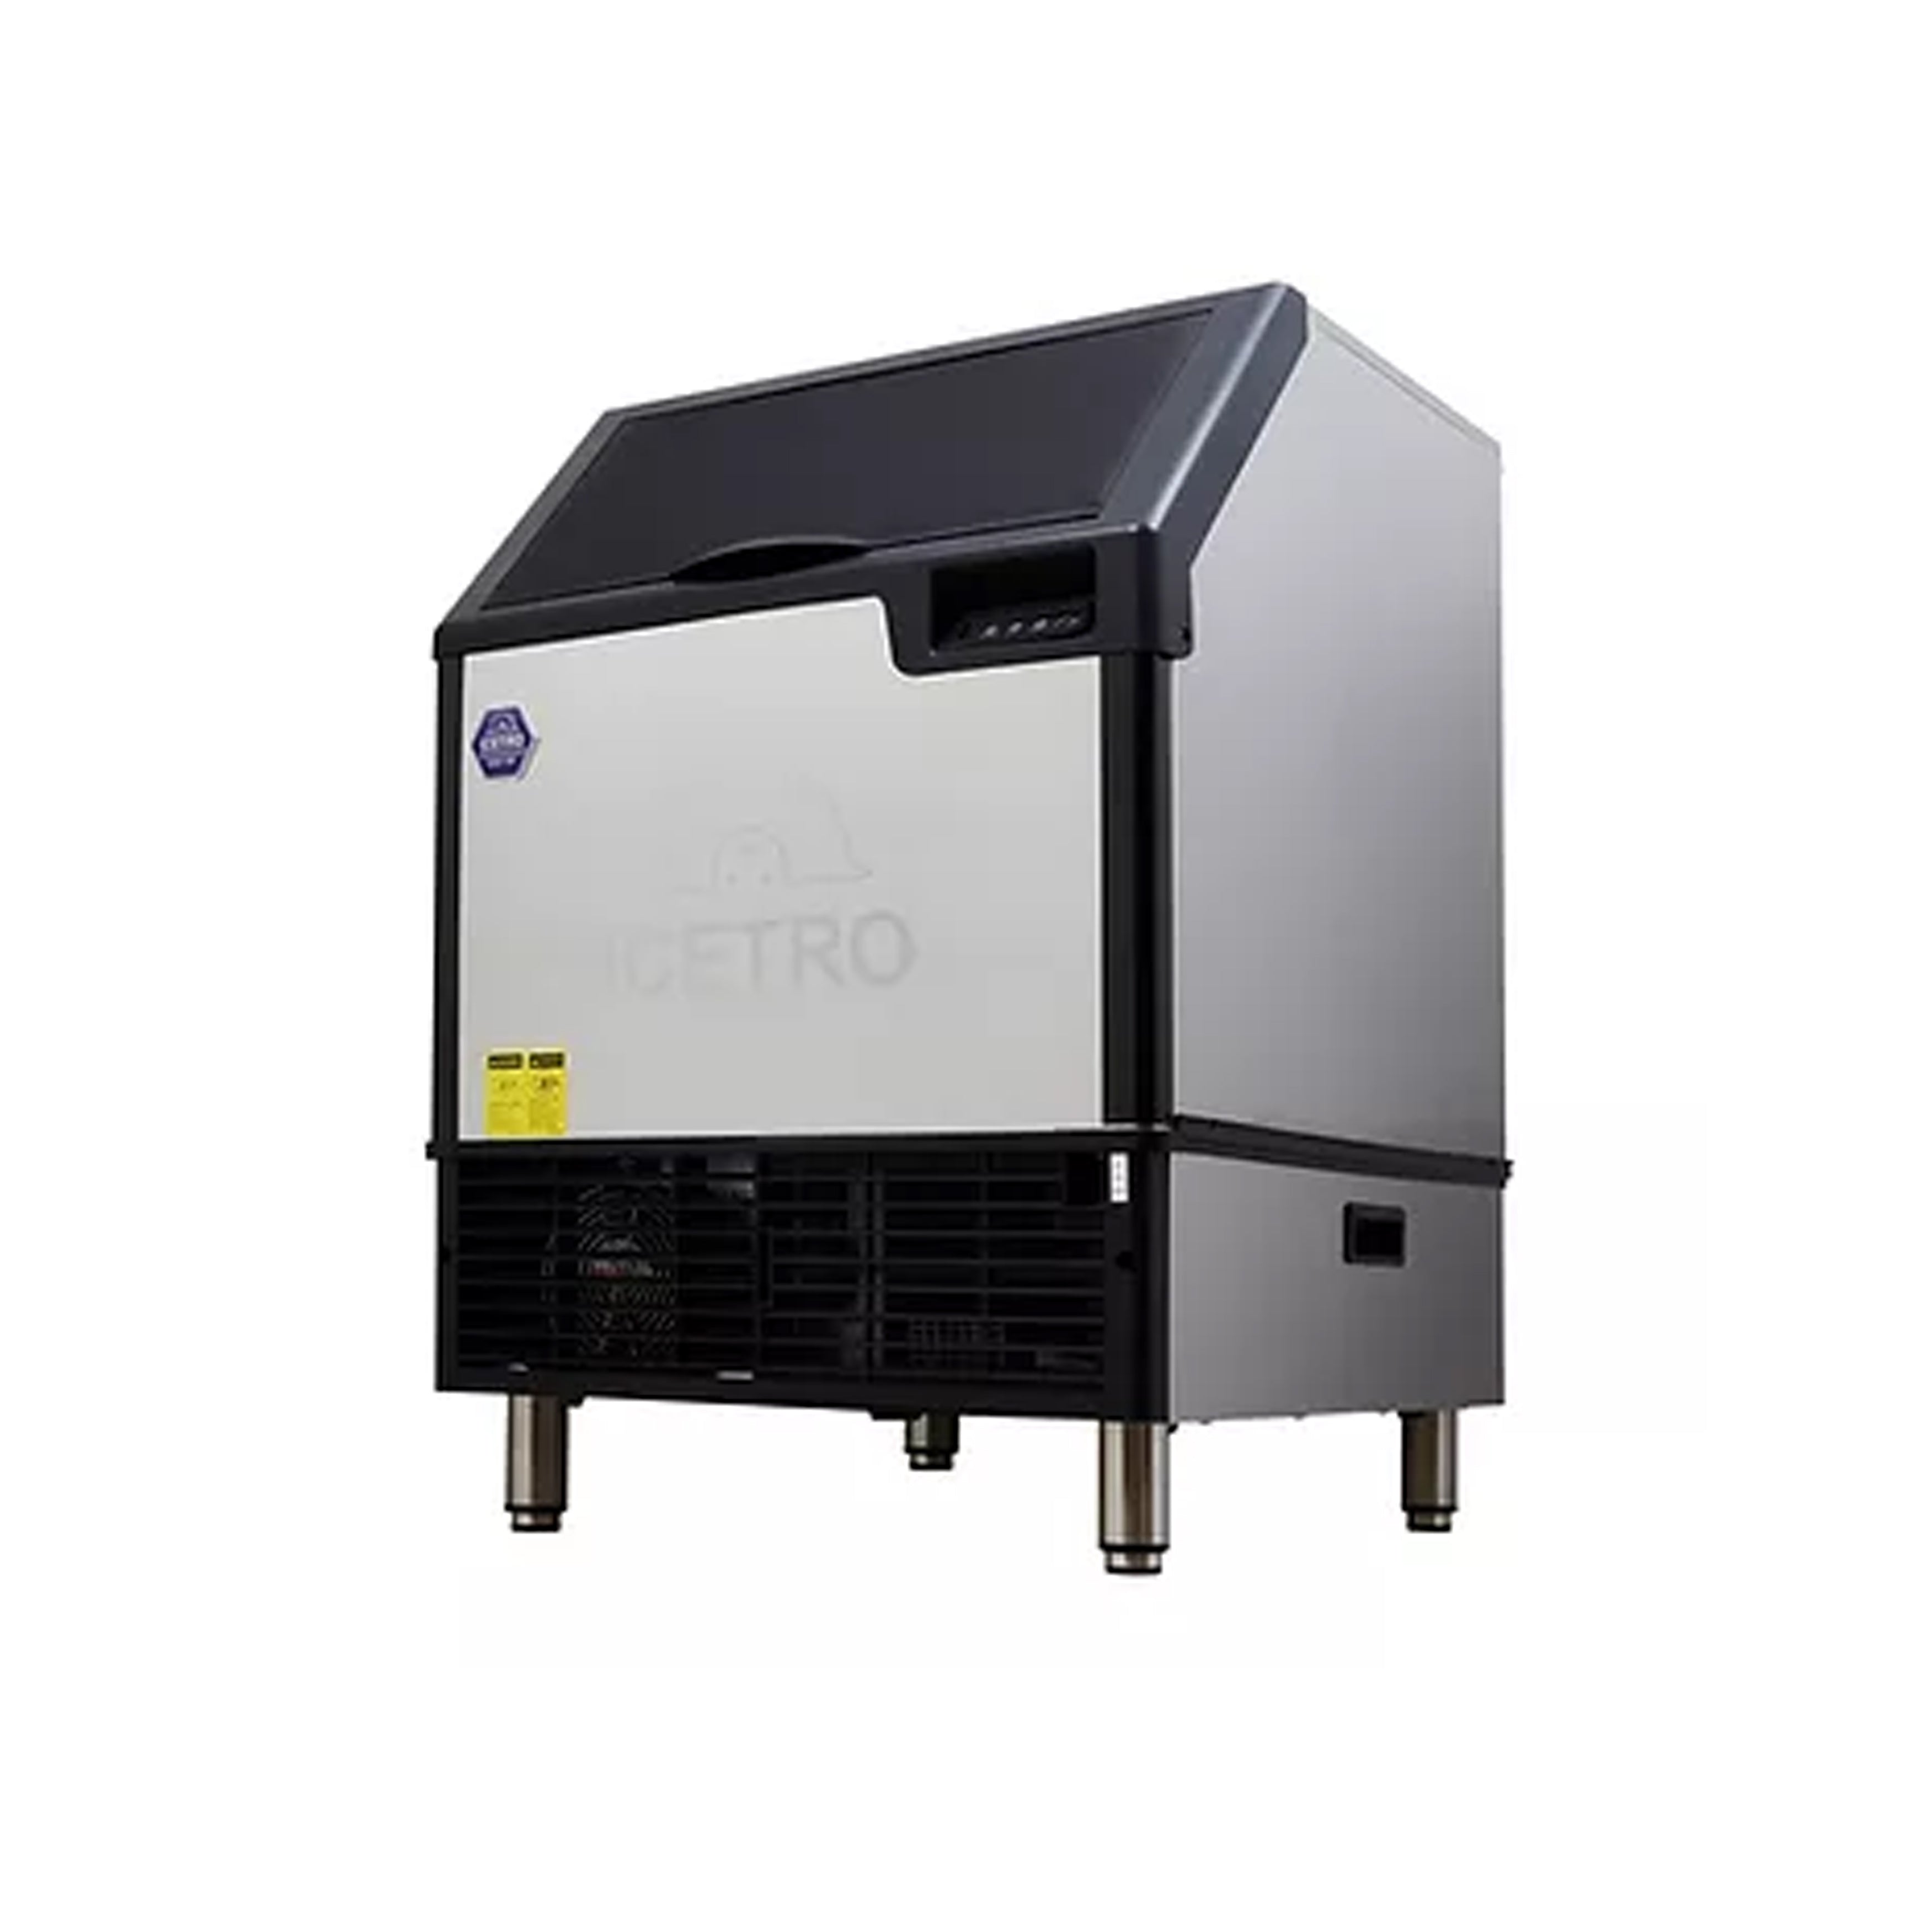 Icetro - IU-0220-AH, Commercial 77lbs Undercounter Air Cooled Ice Machine Half Ice Cube Maker